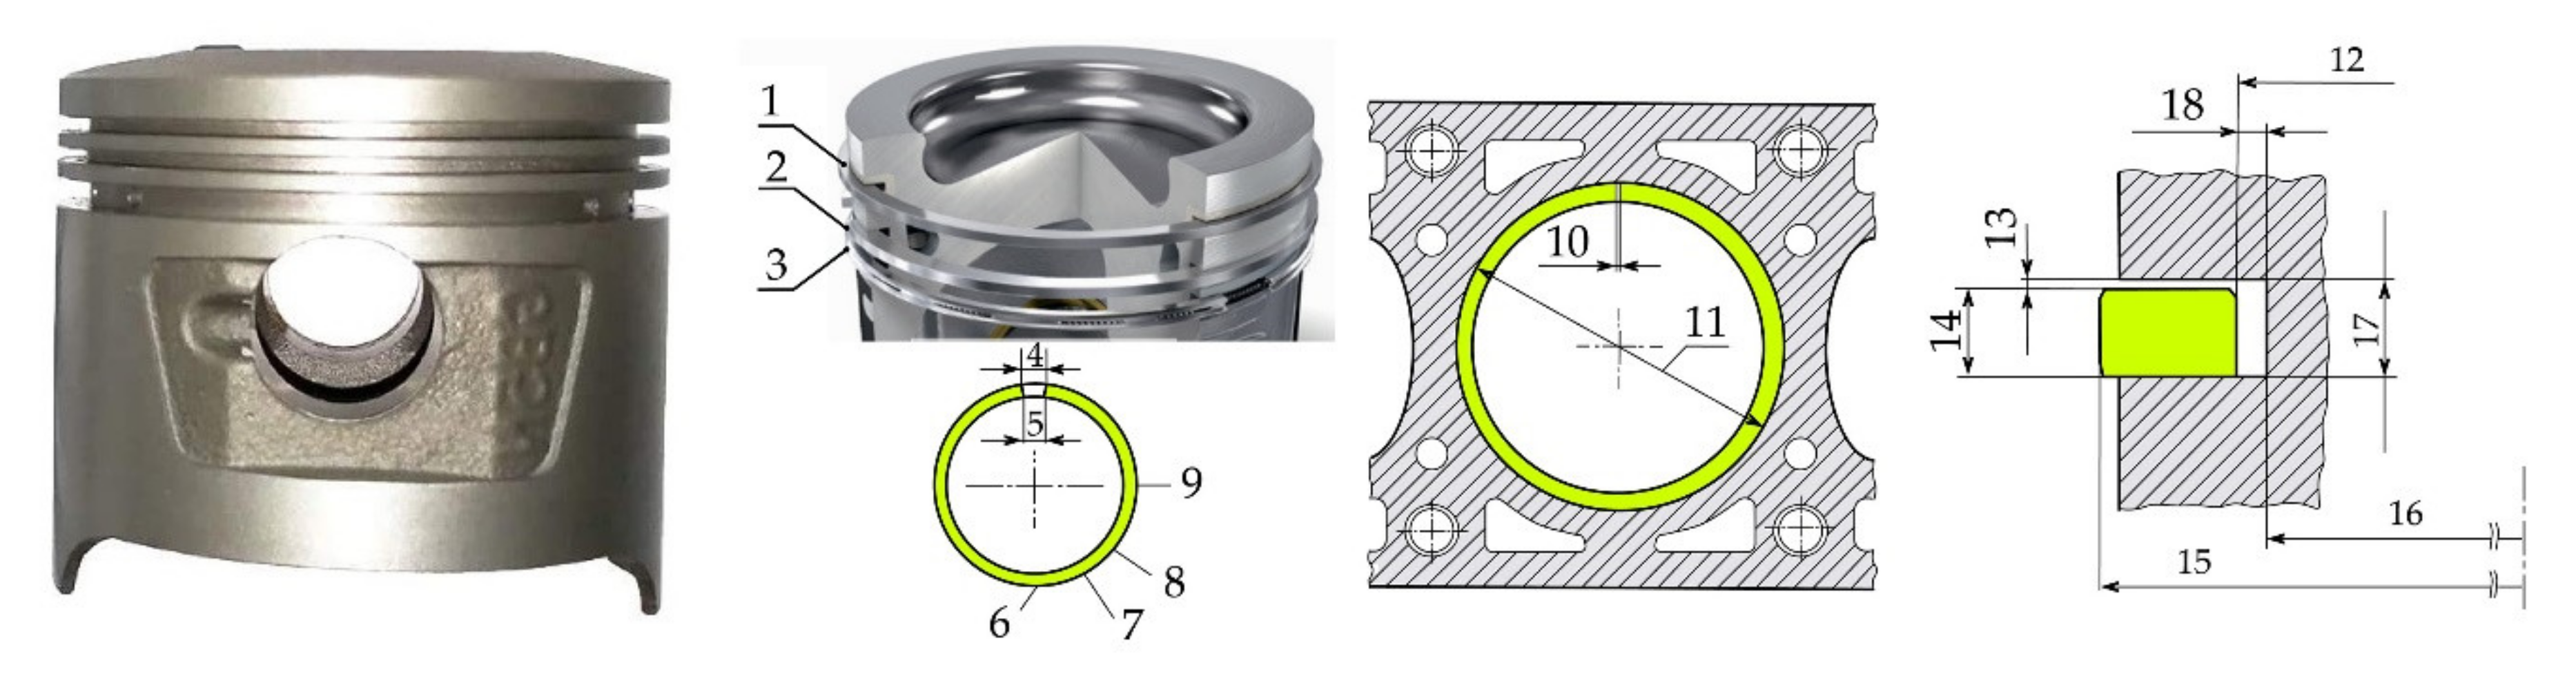 How to select a piston ring | Hemmings